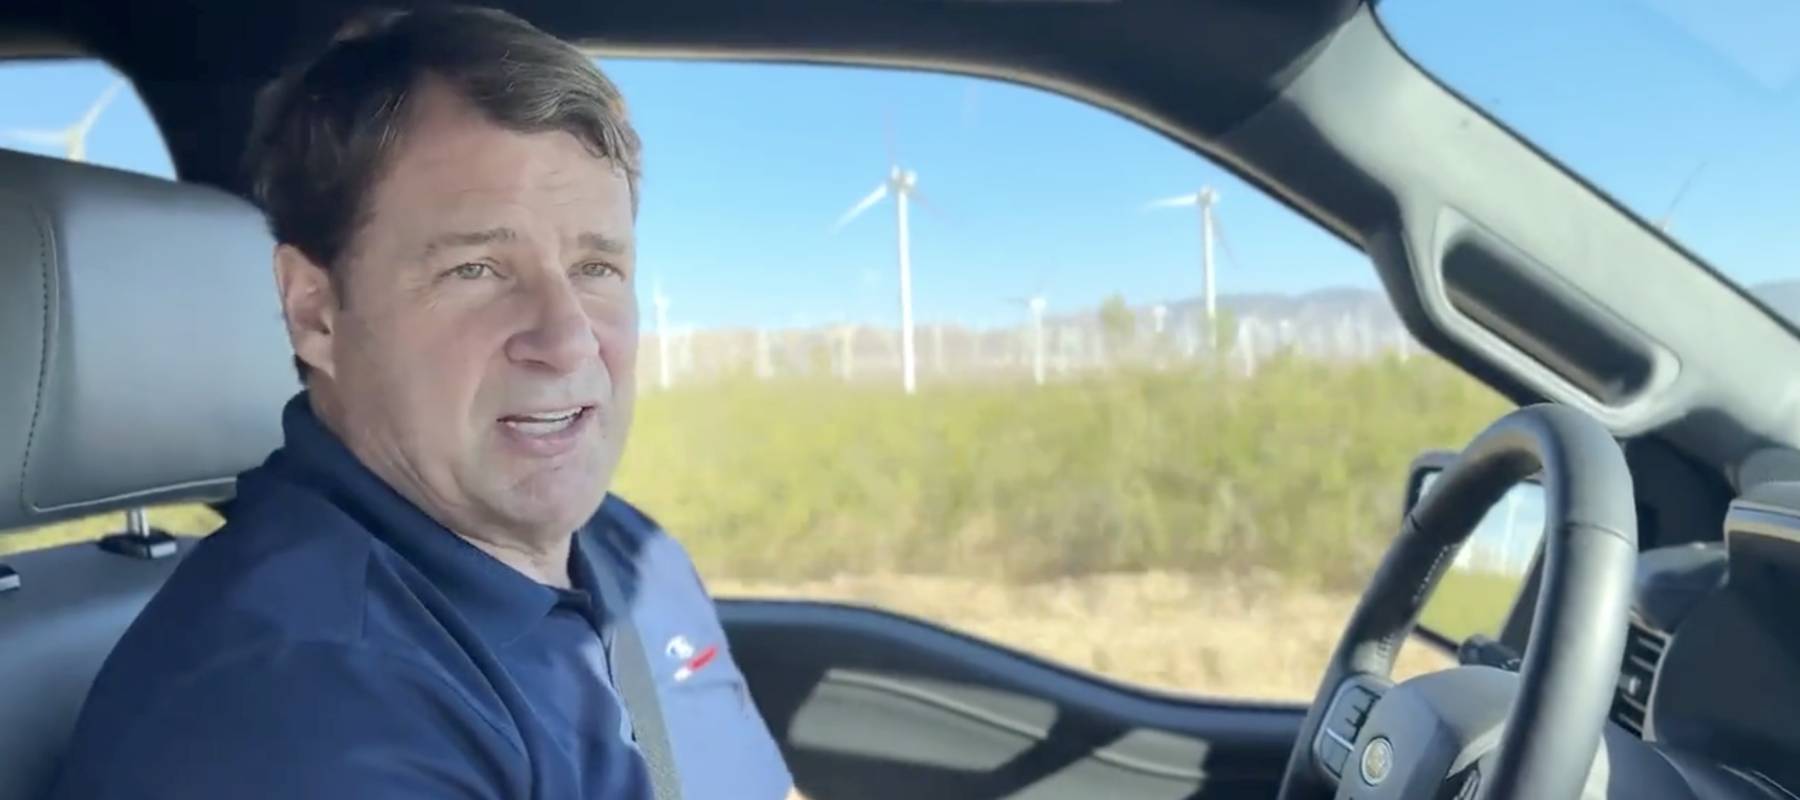 Ford CEO Jim Farley posted a video on X, formerly Twitter, about charging stations for electric vehicles.